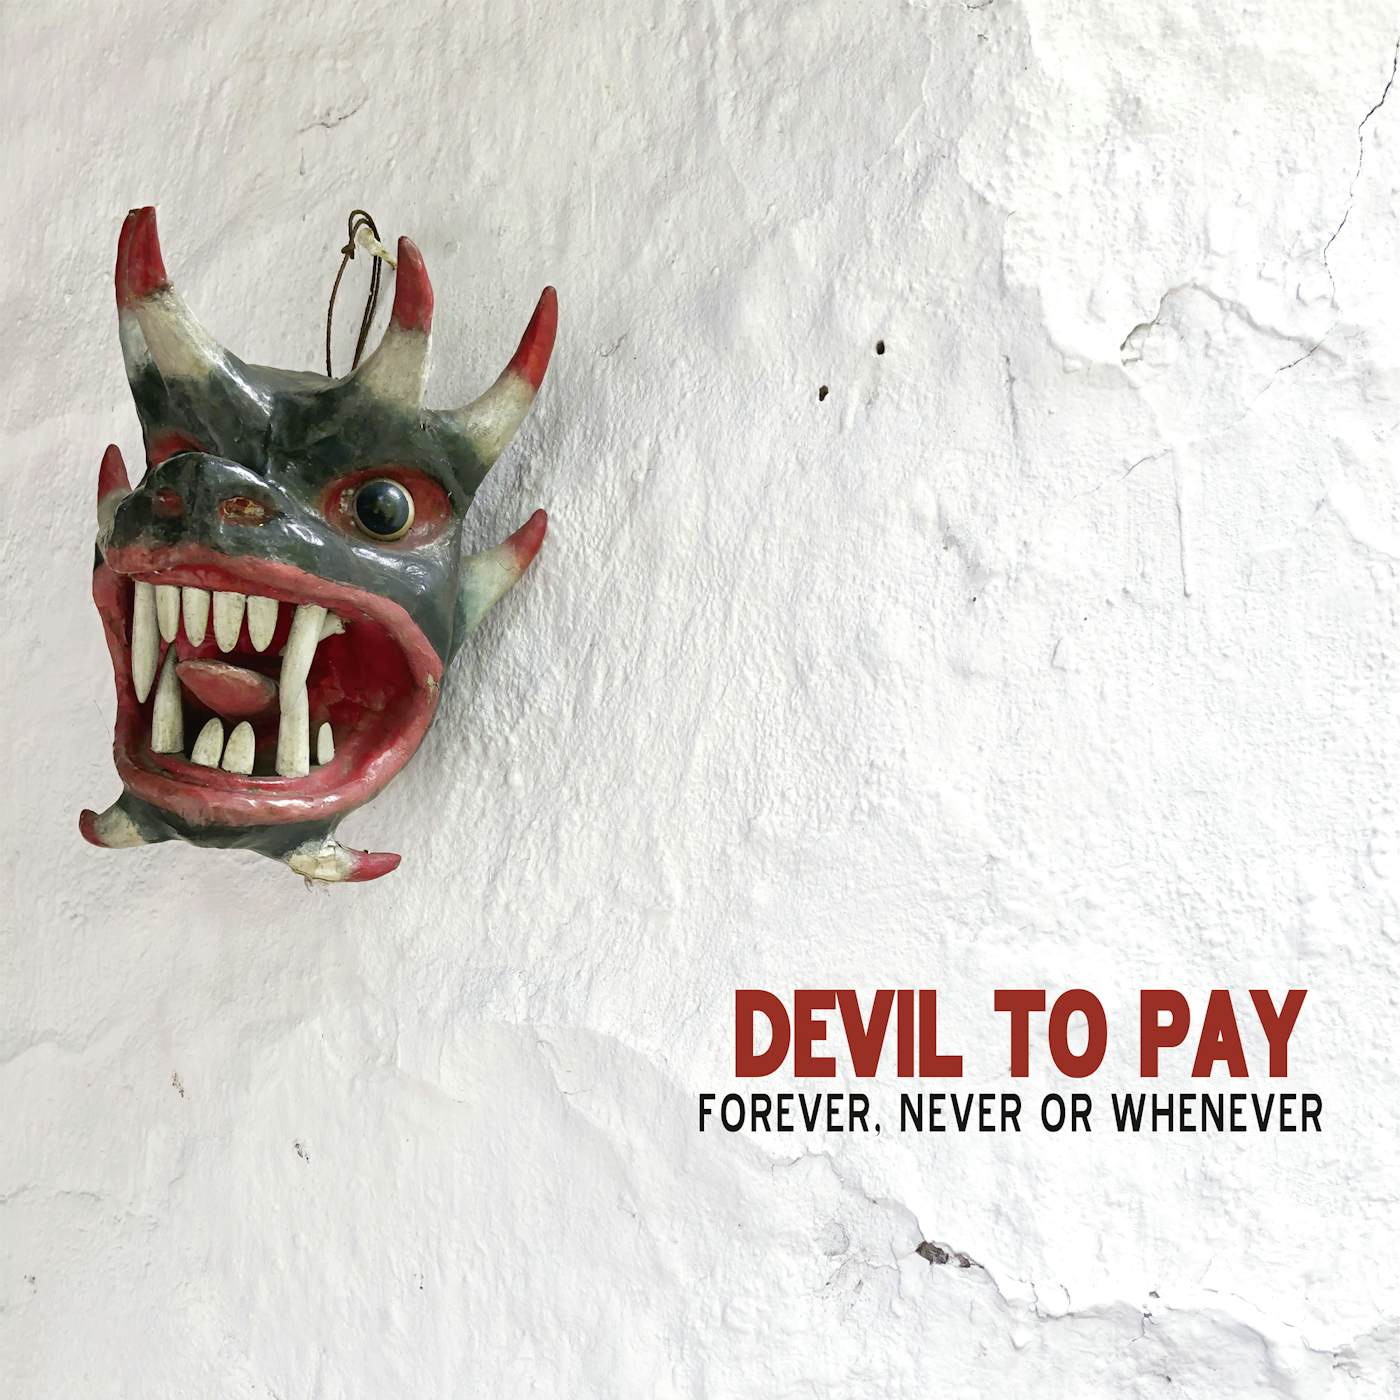 Devil To Pay Forever, Never Or Whenever Vinyl Record